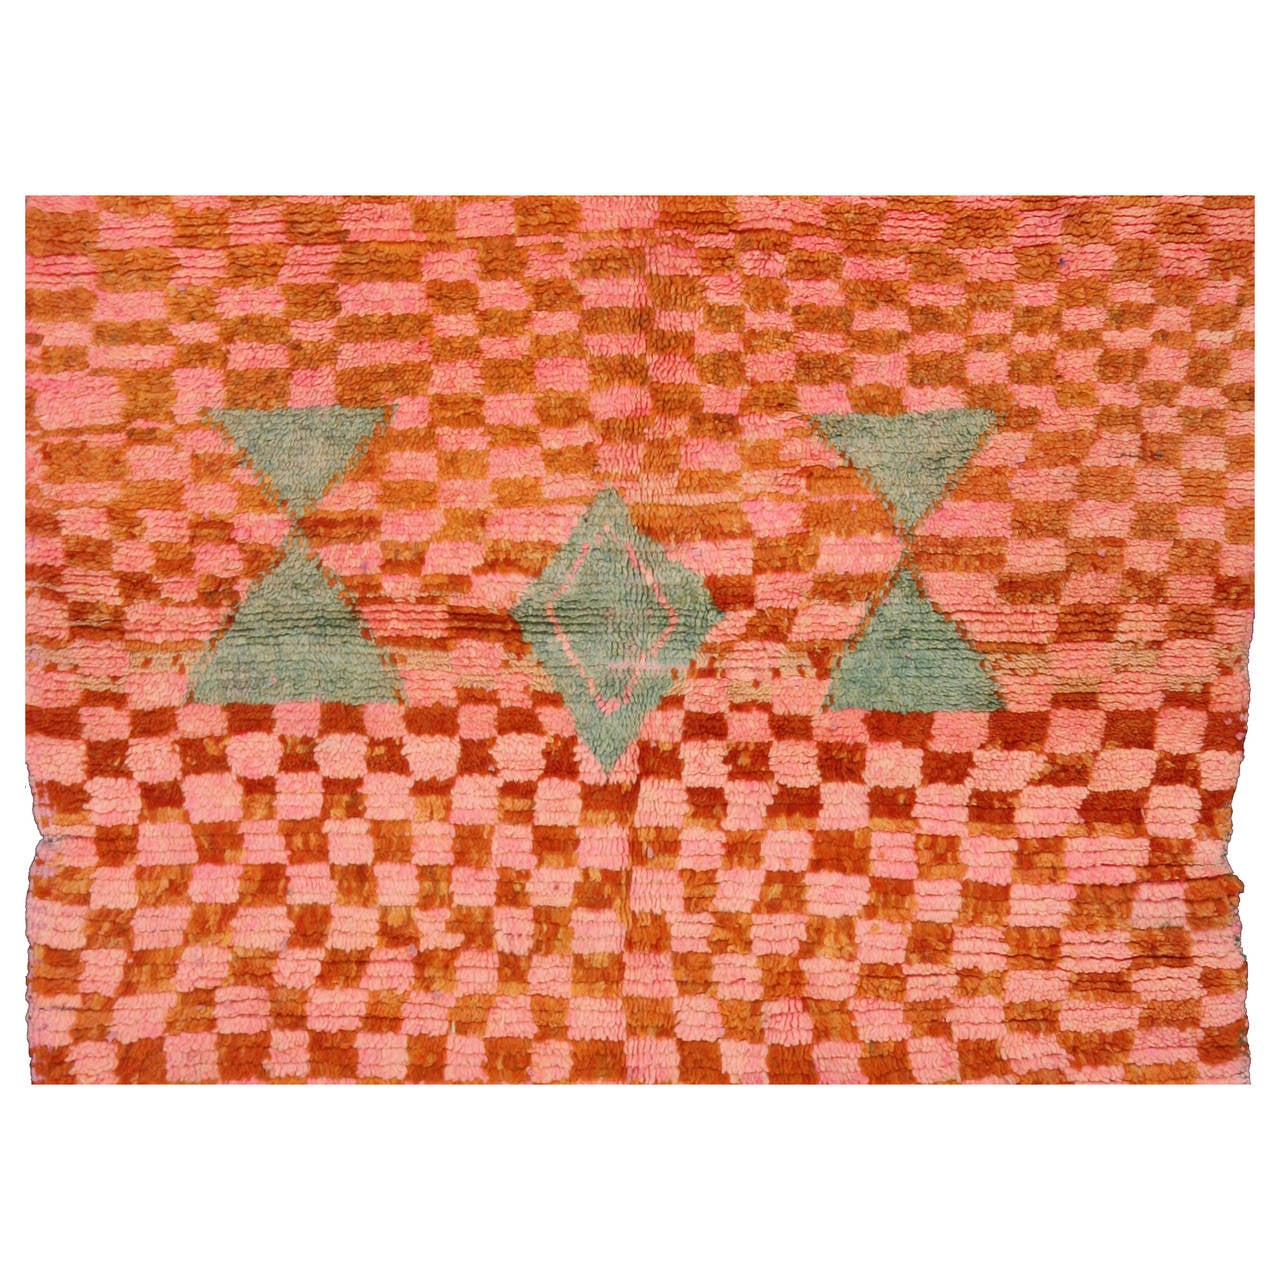 This Mid-Century Moroccan rug features a checkerboard pattern woven in a striking combination of apricot orange, peach and pink-orange colors. This pink and orange color palette is pleasant, warm and inviting. Feminine and relaxing, this pink and